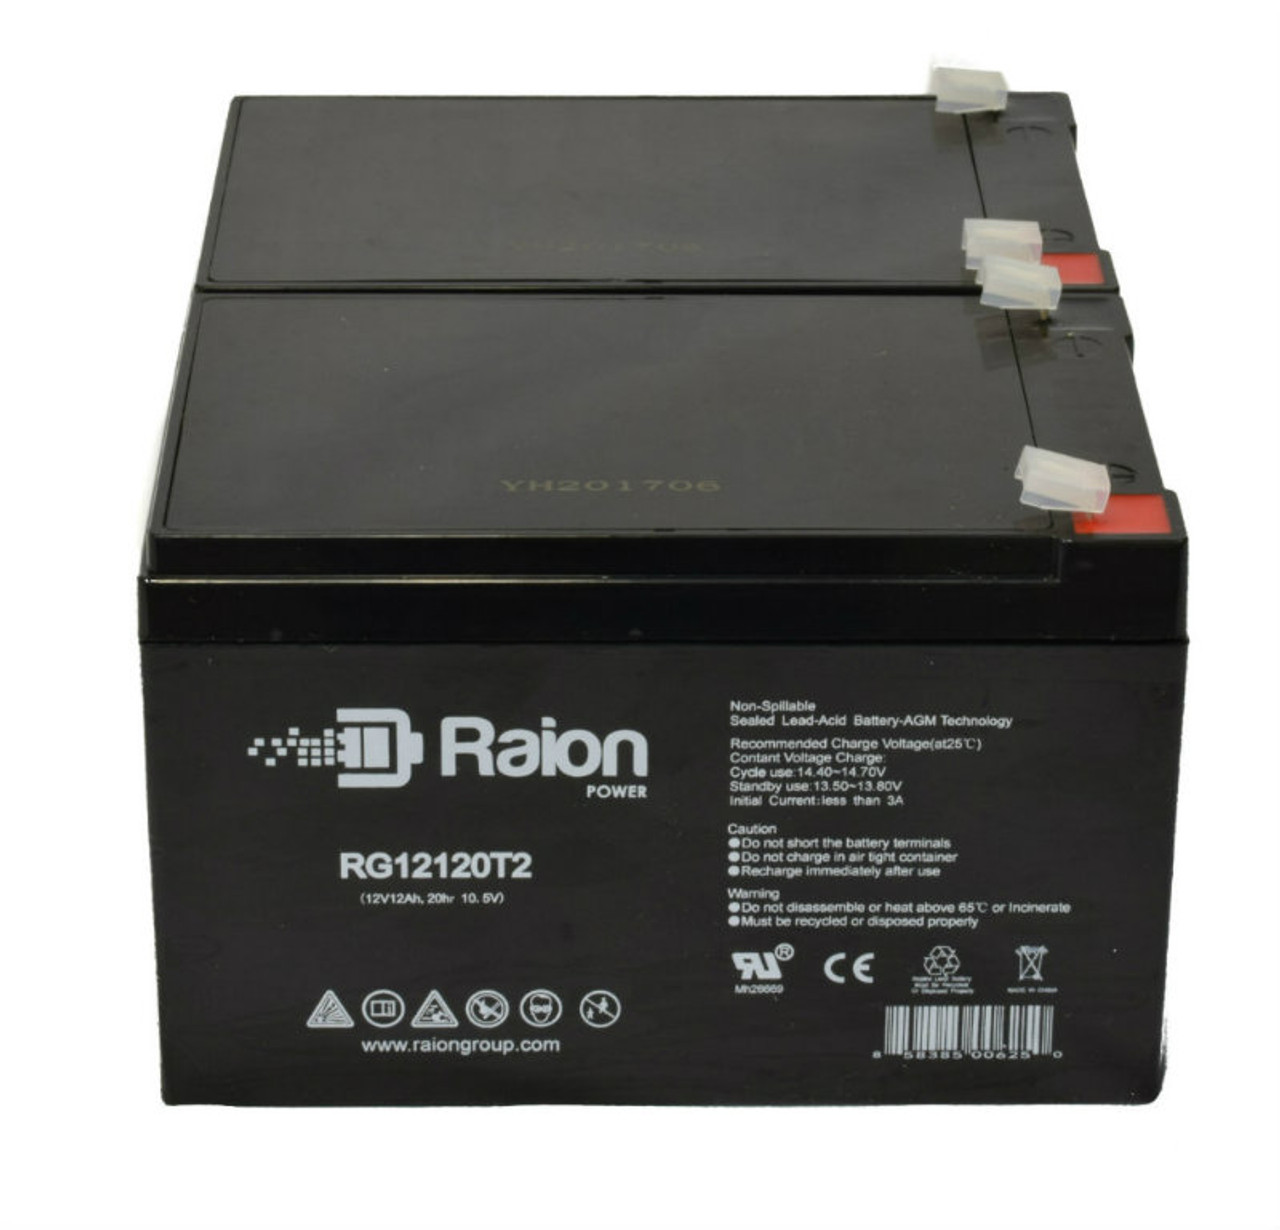 Raion Power 12V 12Ah Replacement Alarm Security System Battery for Altronix AL400UL3X - 2 Pack